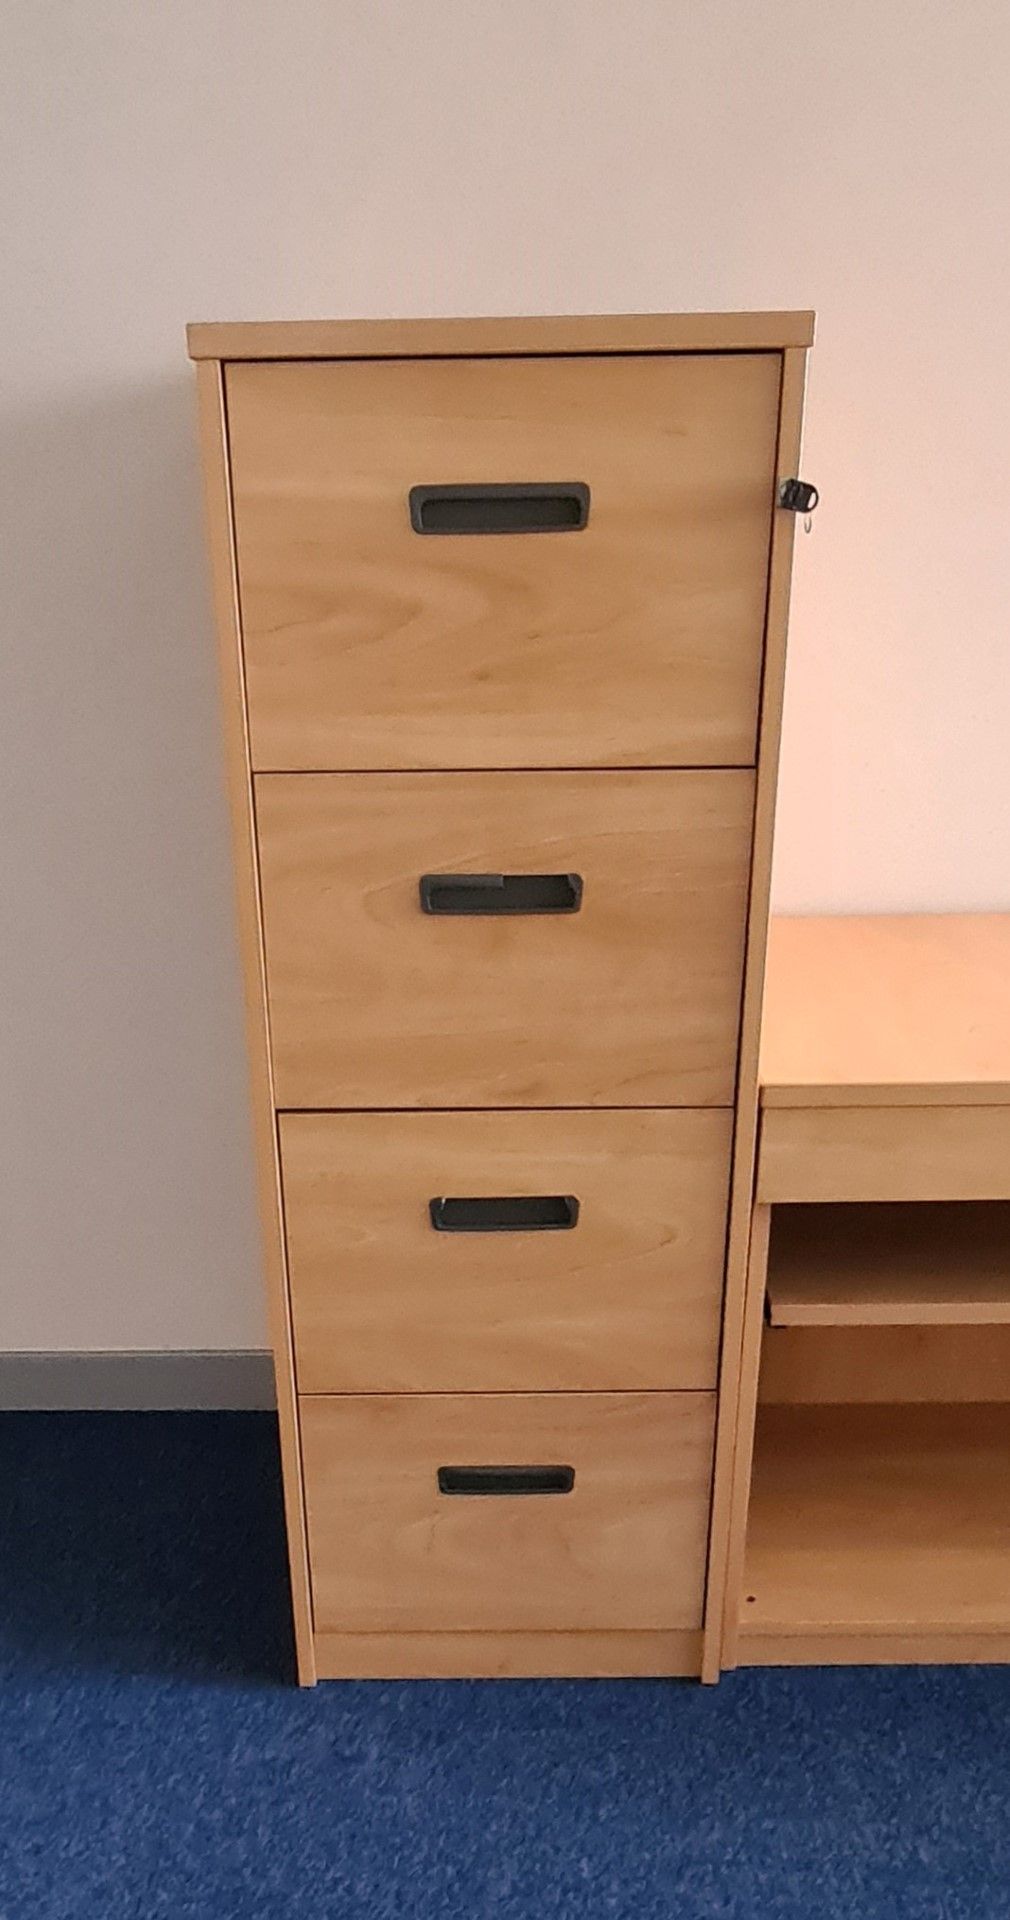 1 x Office Four Drawer Filing Cabinet With a Beech Finish - Ref: 1 x PK019 - Location: Site 2,